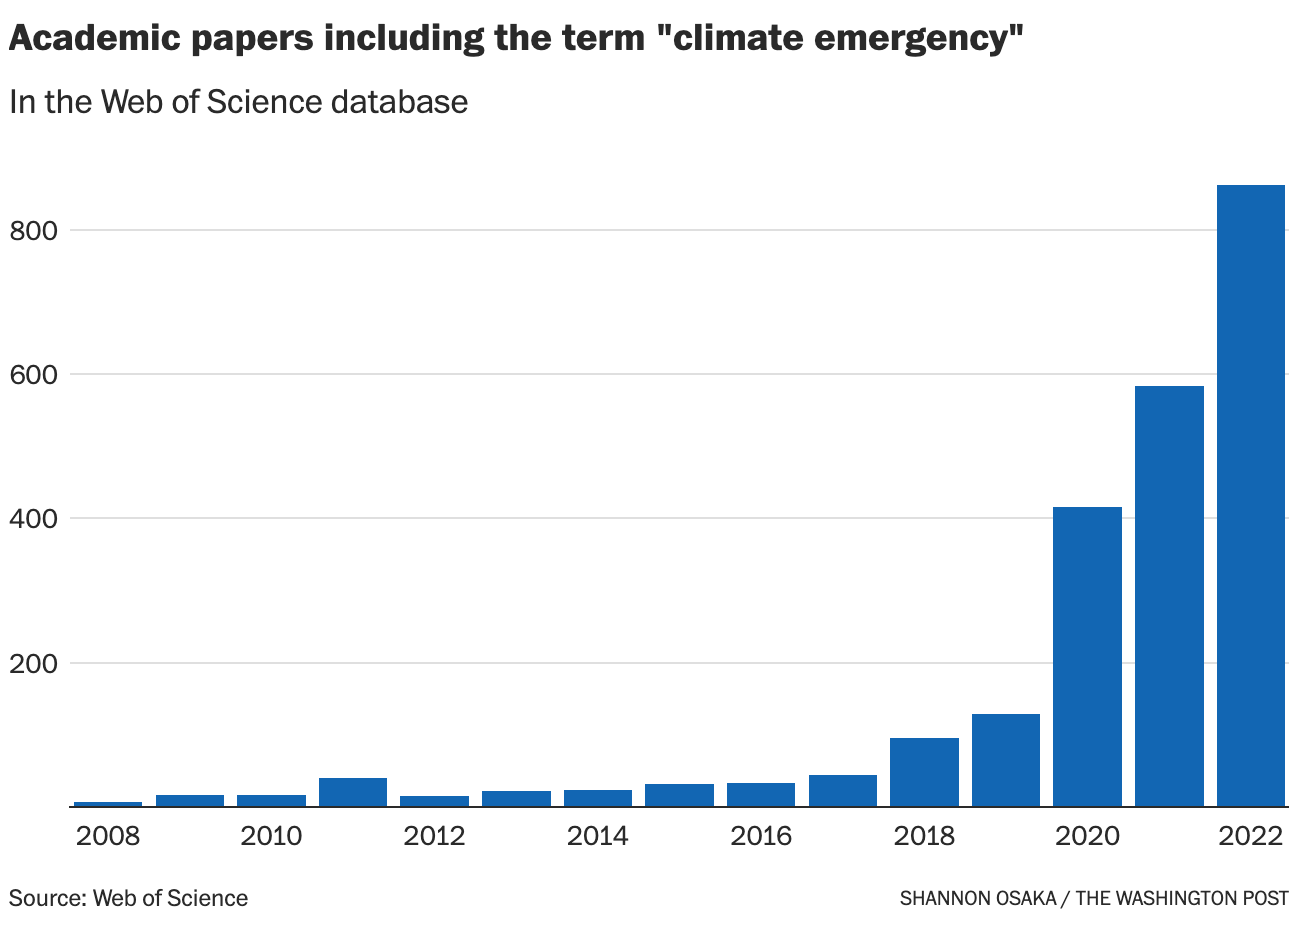 Academic papers including the term "climate emergency" rising exponentially